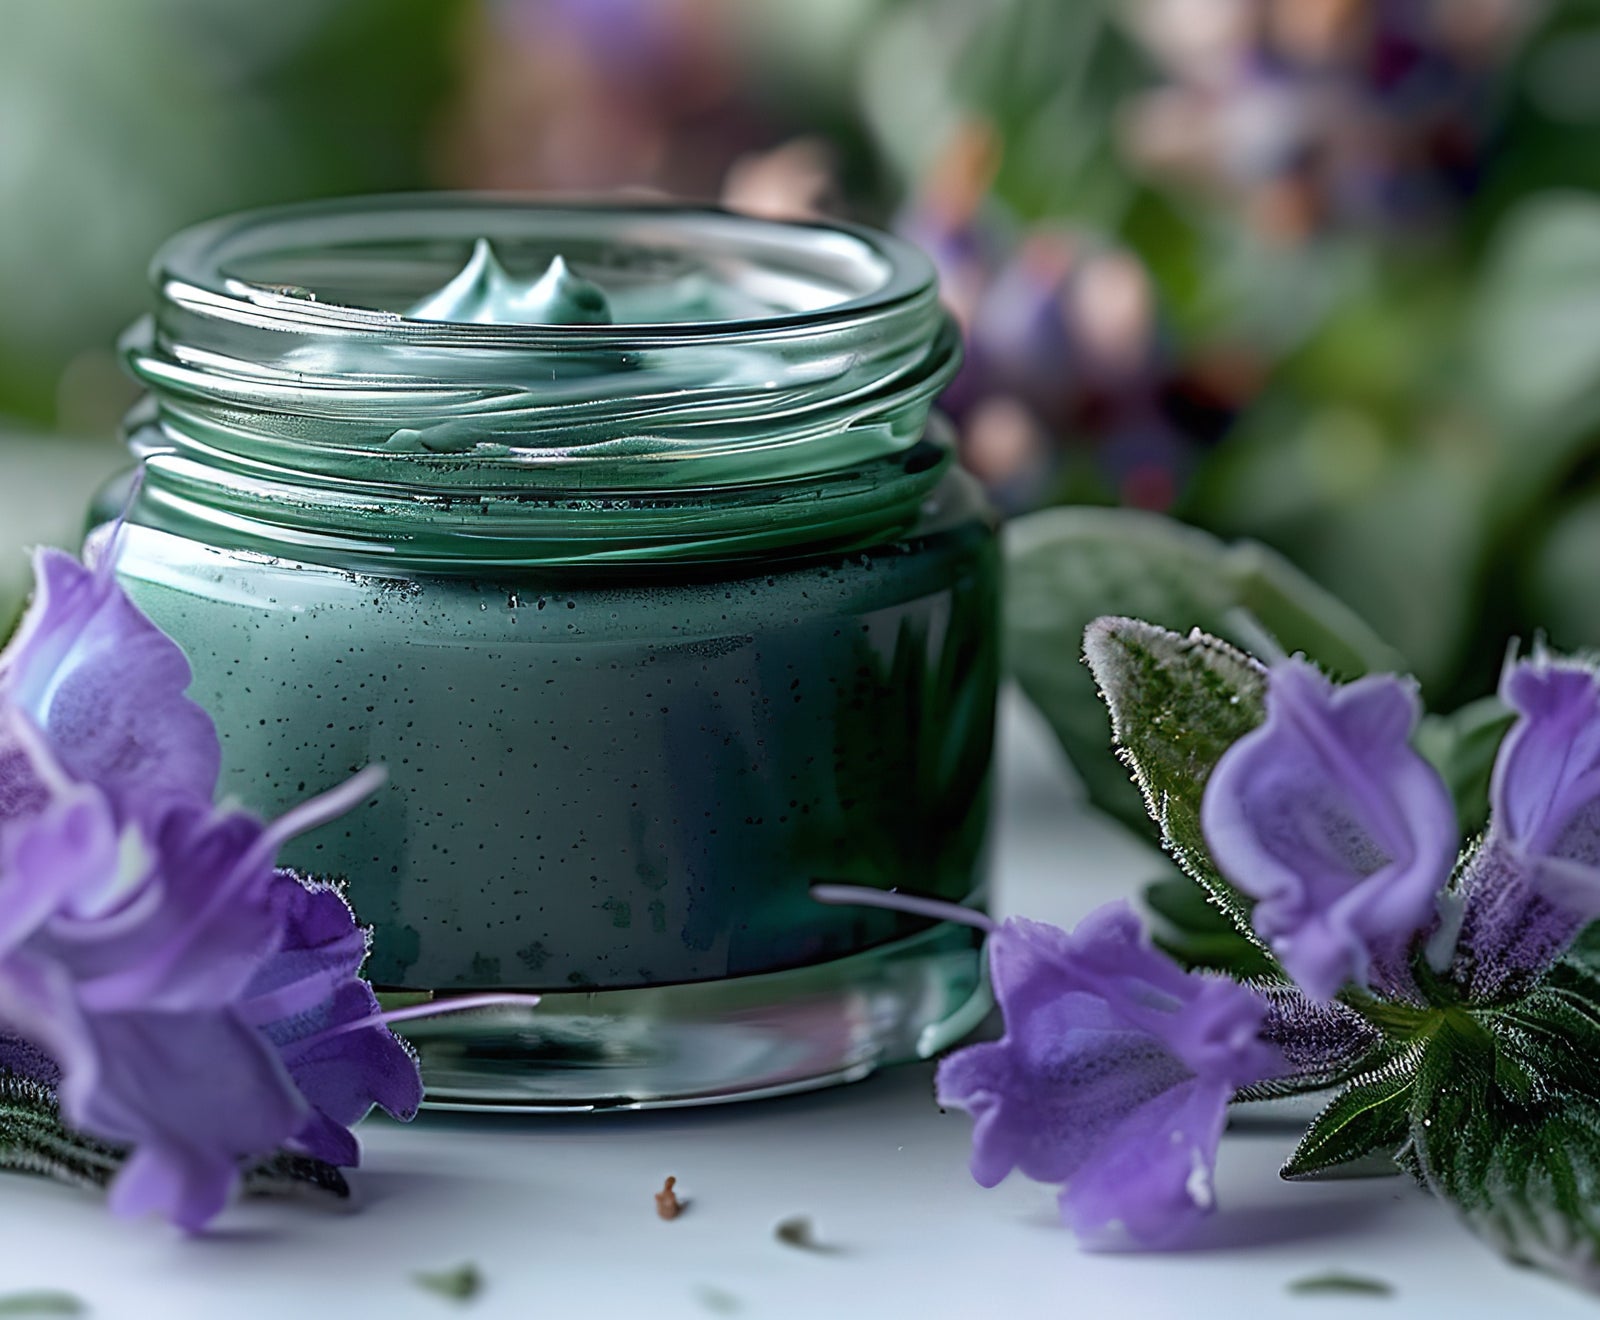 Comfrey ointment – a natural remedy for pain, swelling and bruises